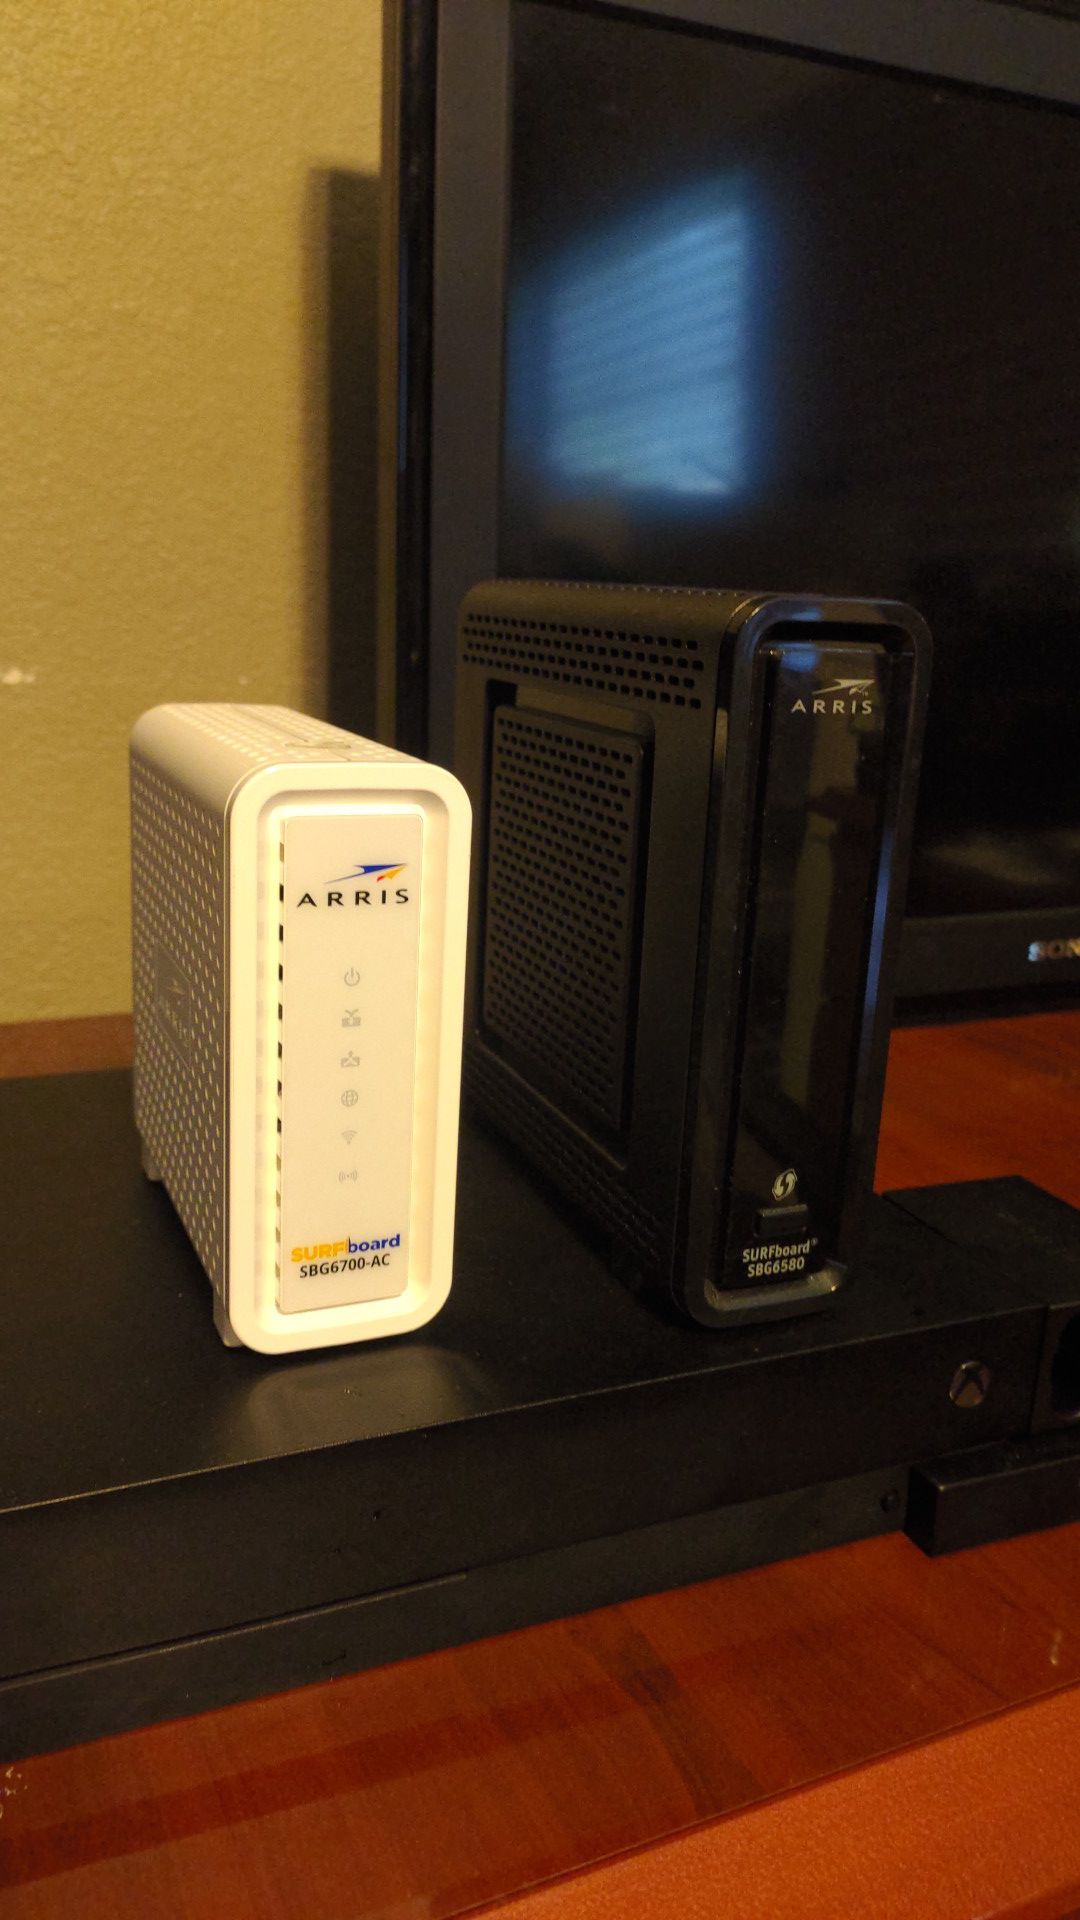 Comcast certified Wi-Fi router modem combos